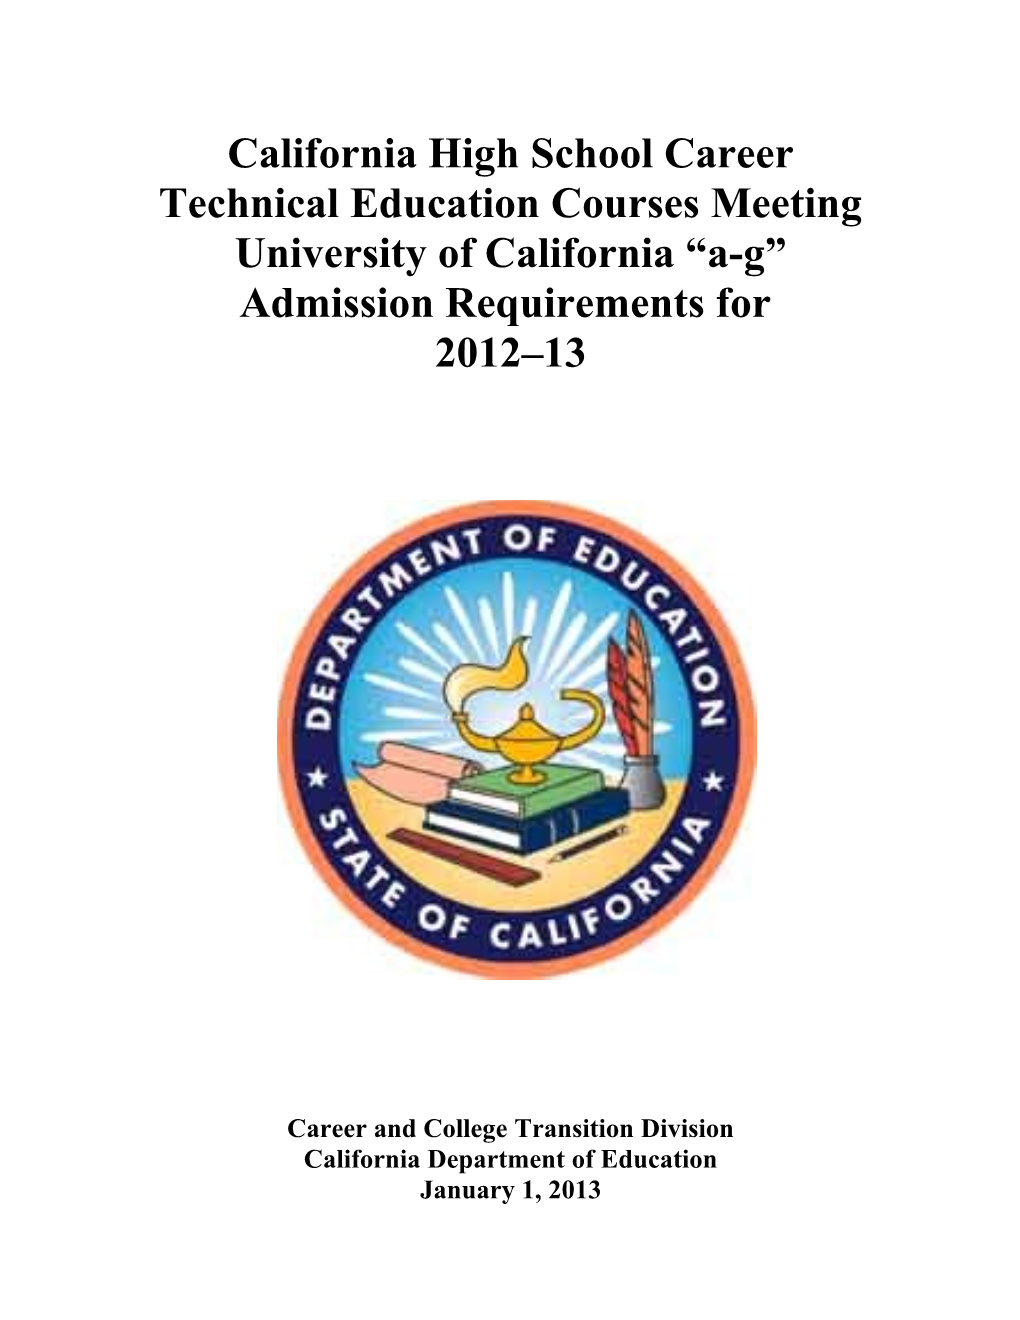 University of California (A-F) Approved Agriculture Courses